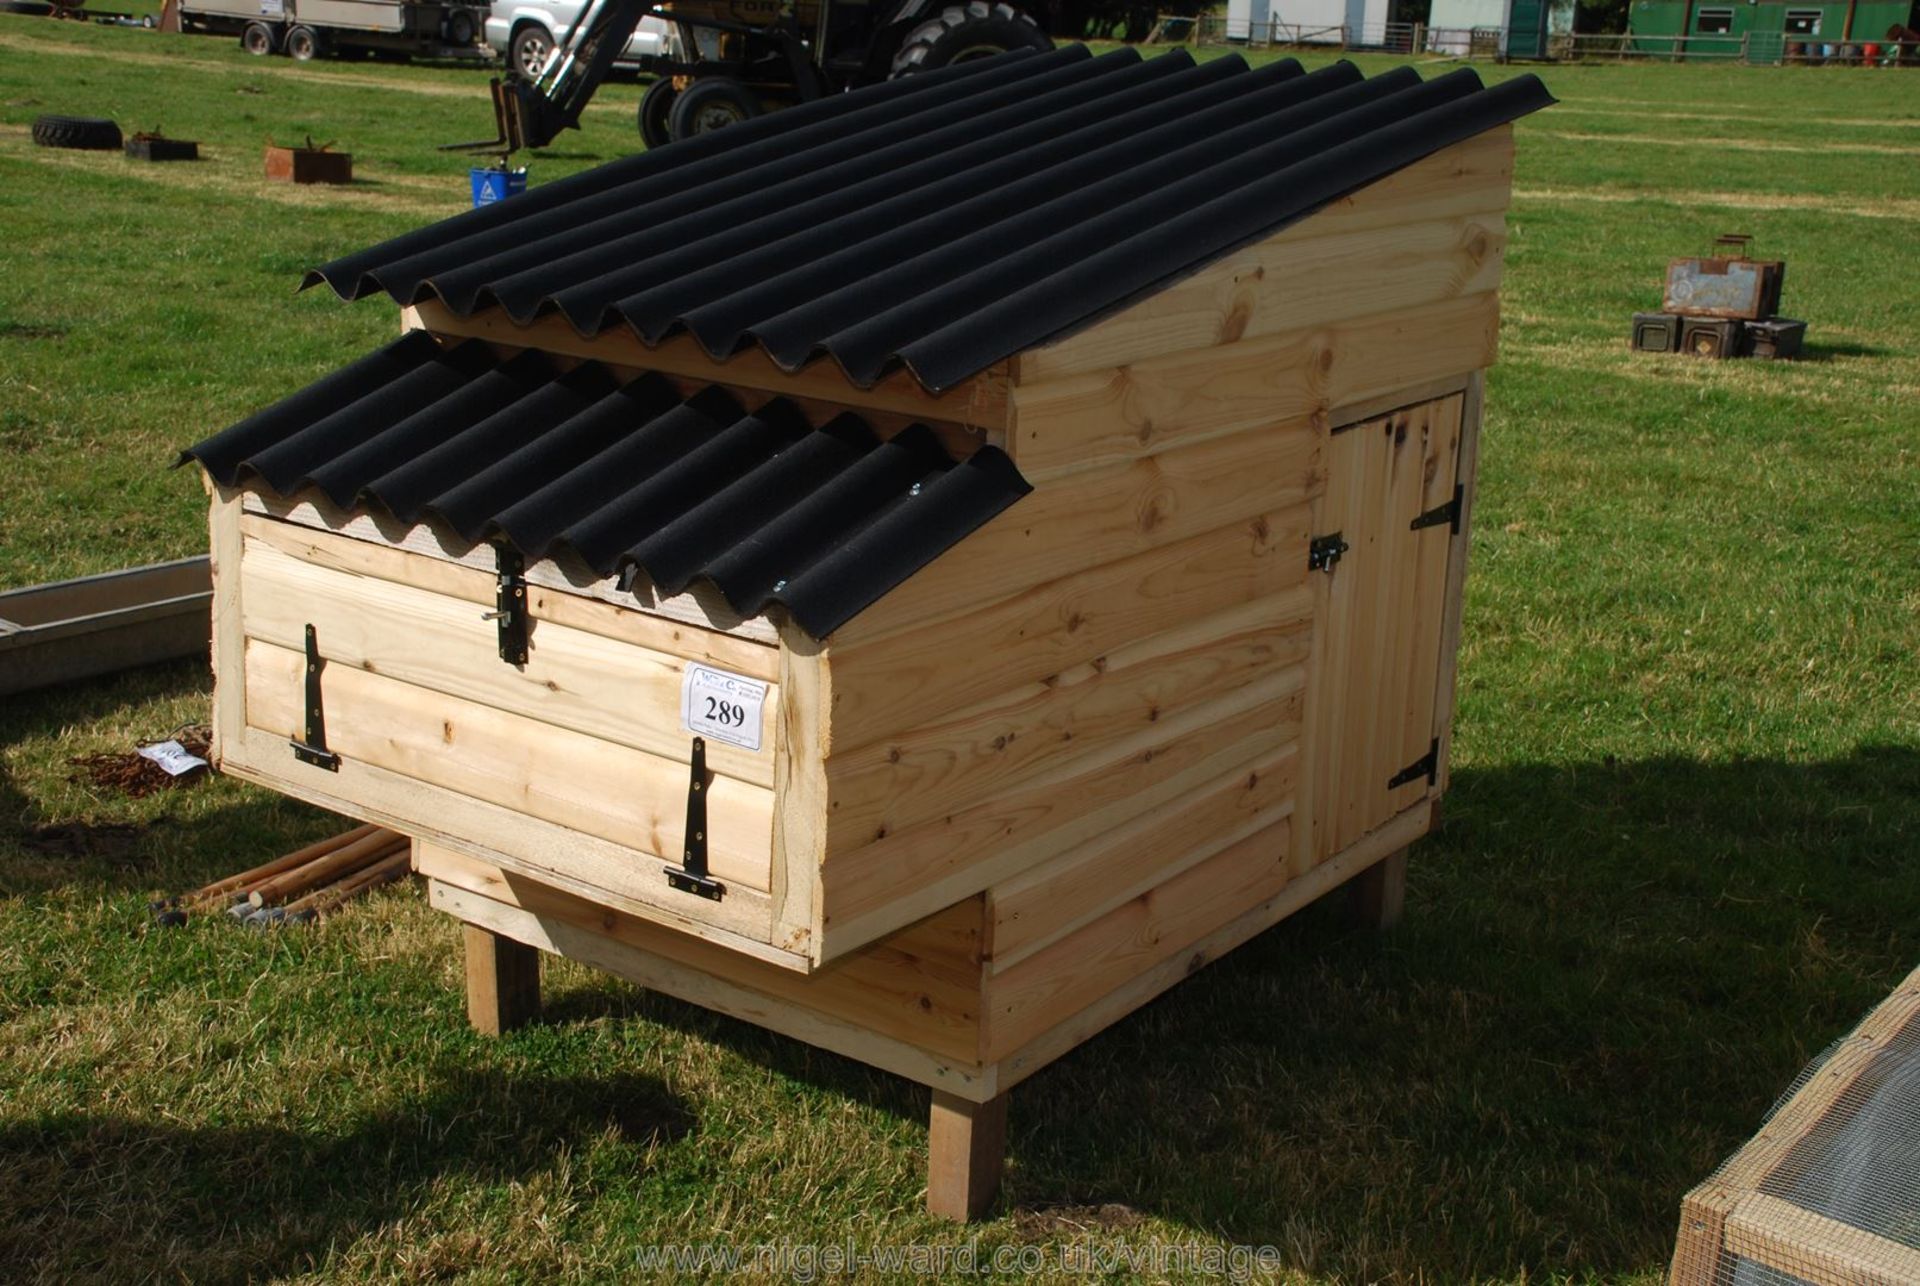 A chicken/poultry house with separate access for nesting boxes.